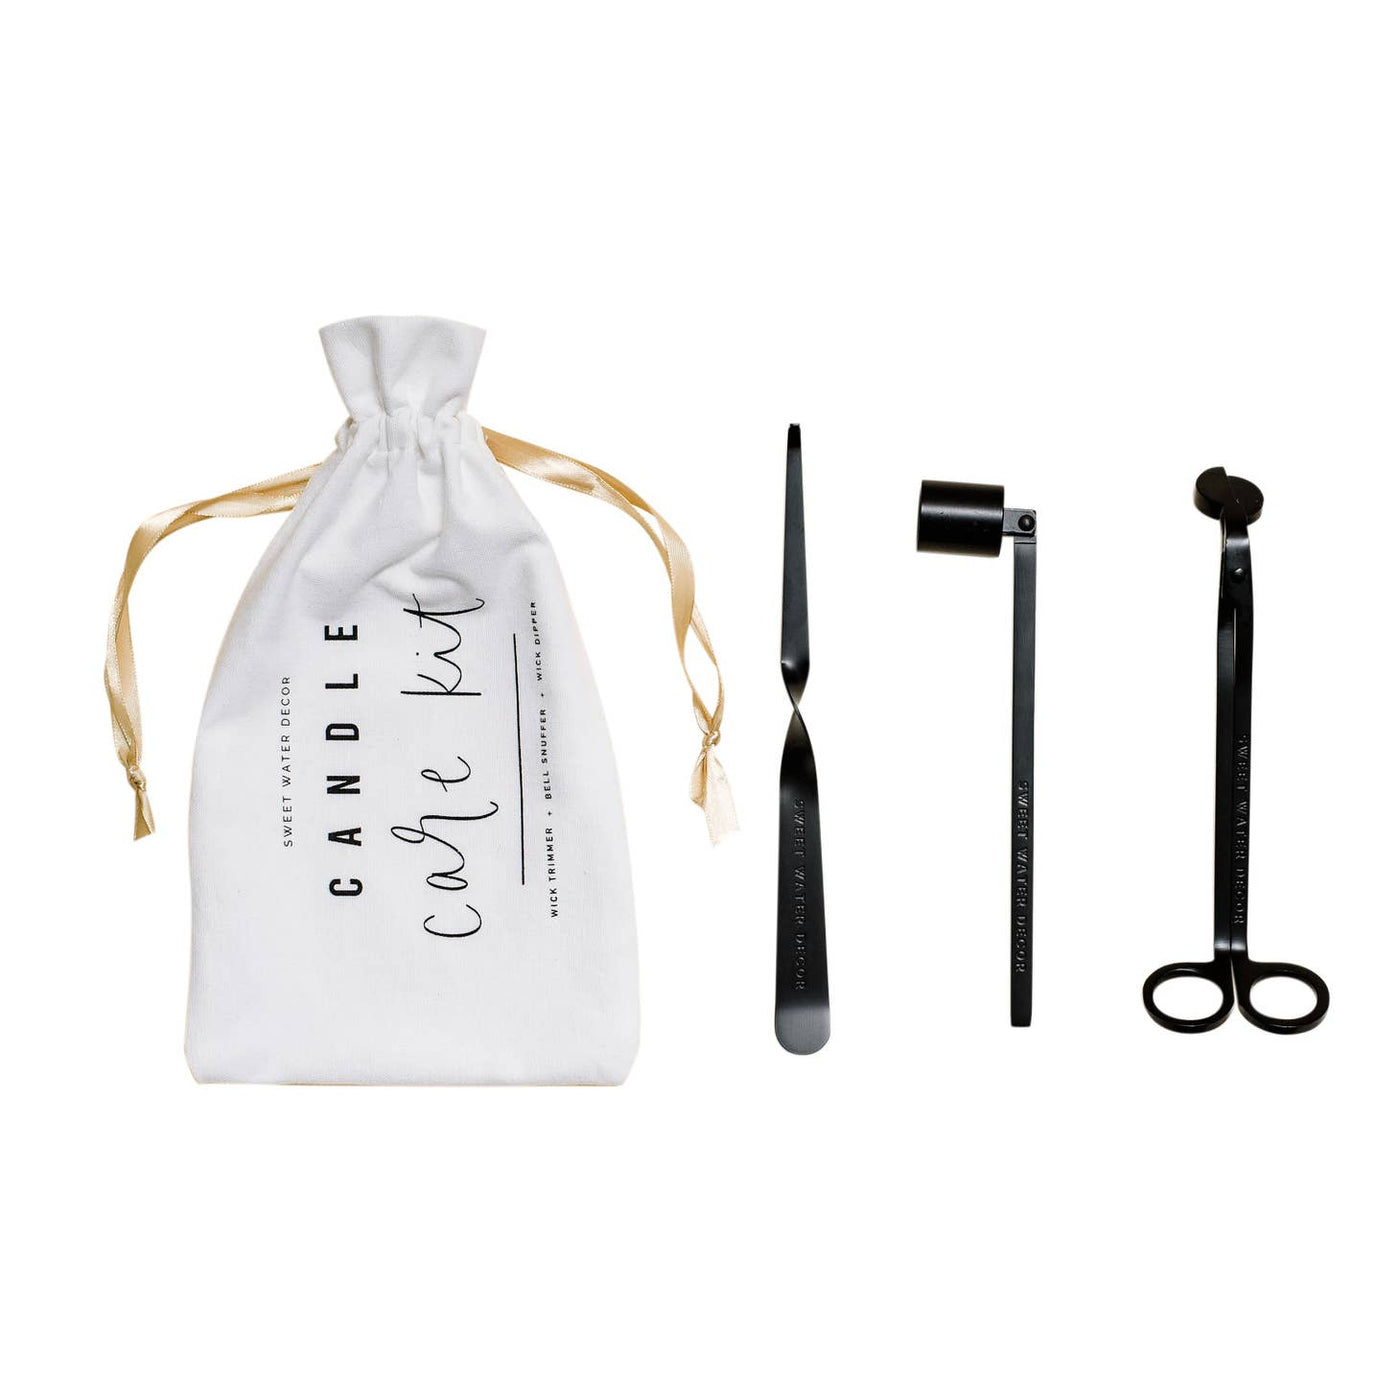 Black Candle Care Kit - Candle Tools - Candle Accessories